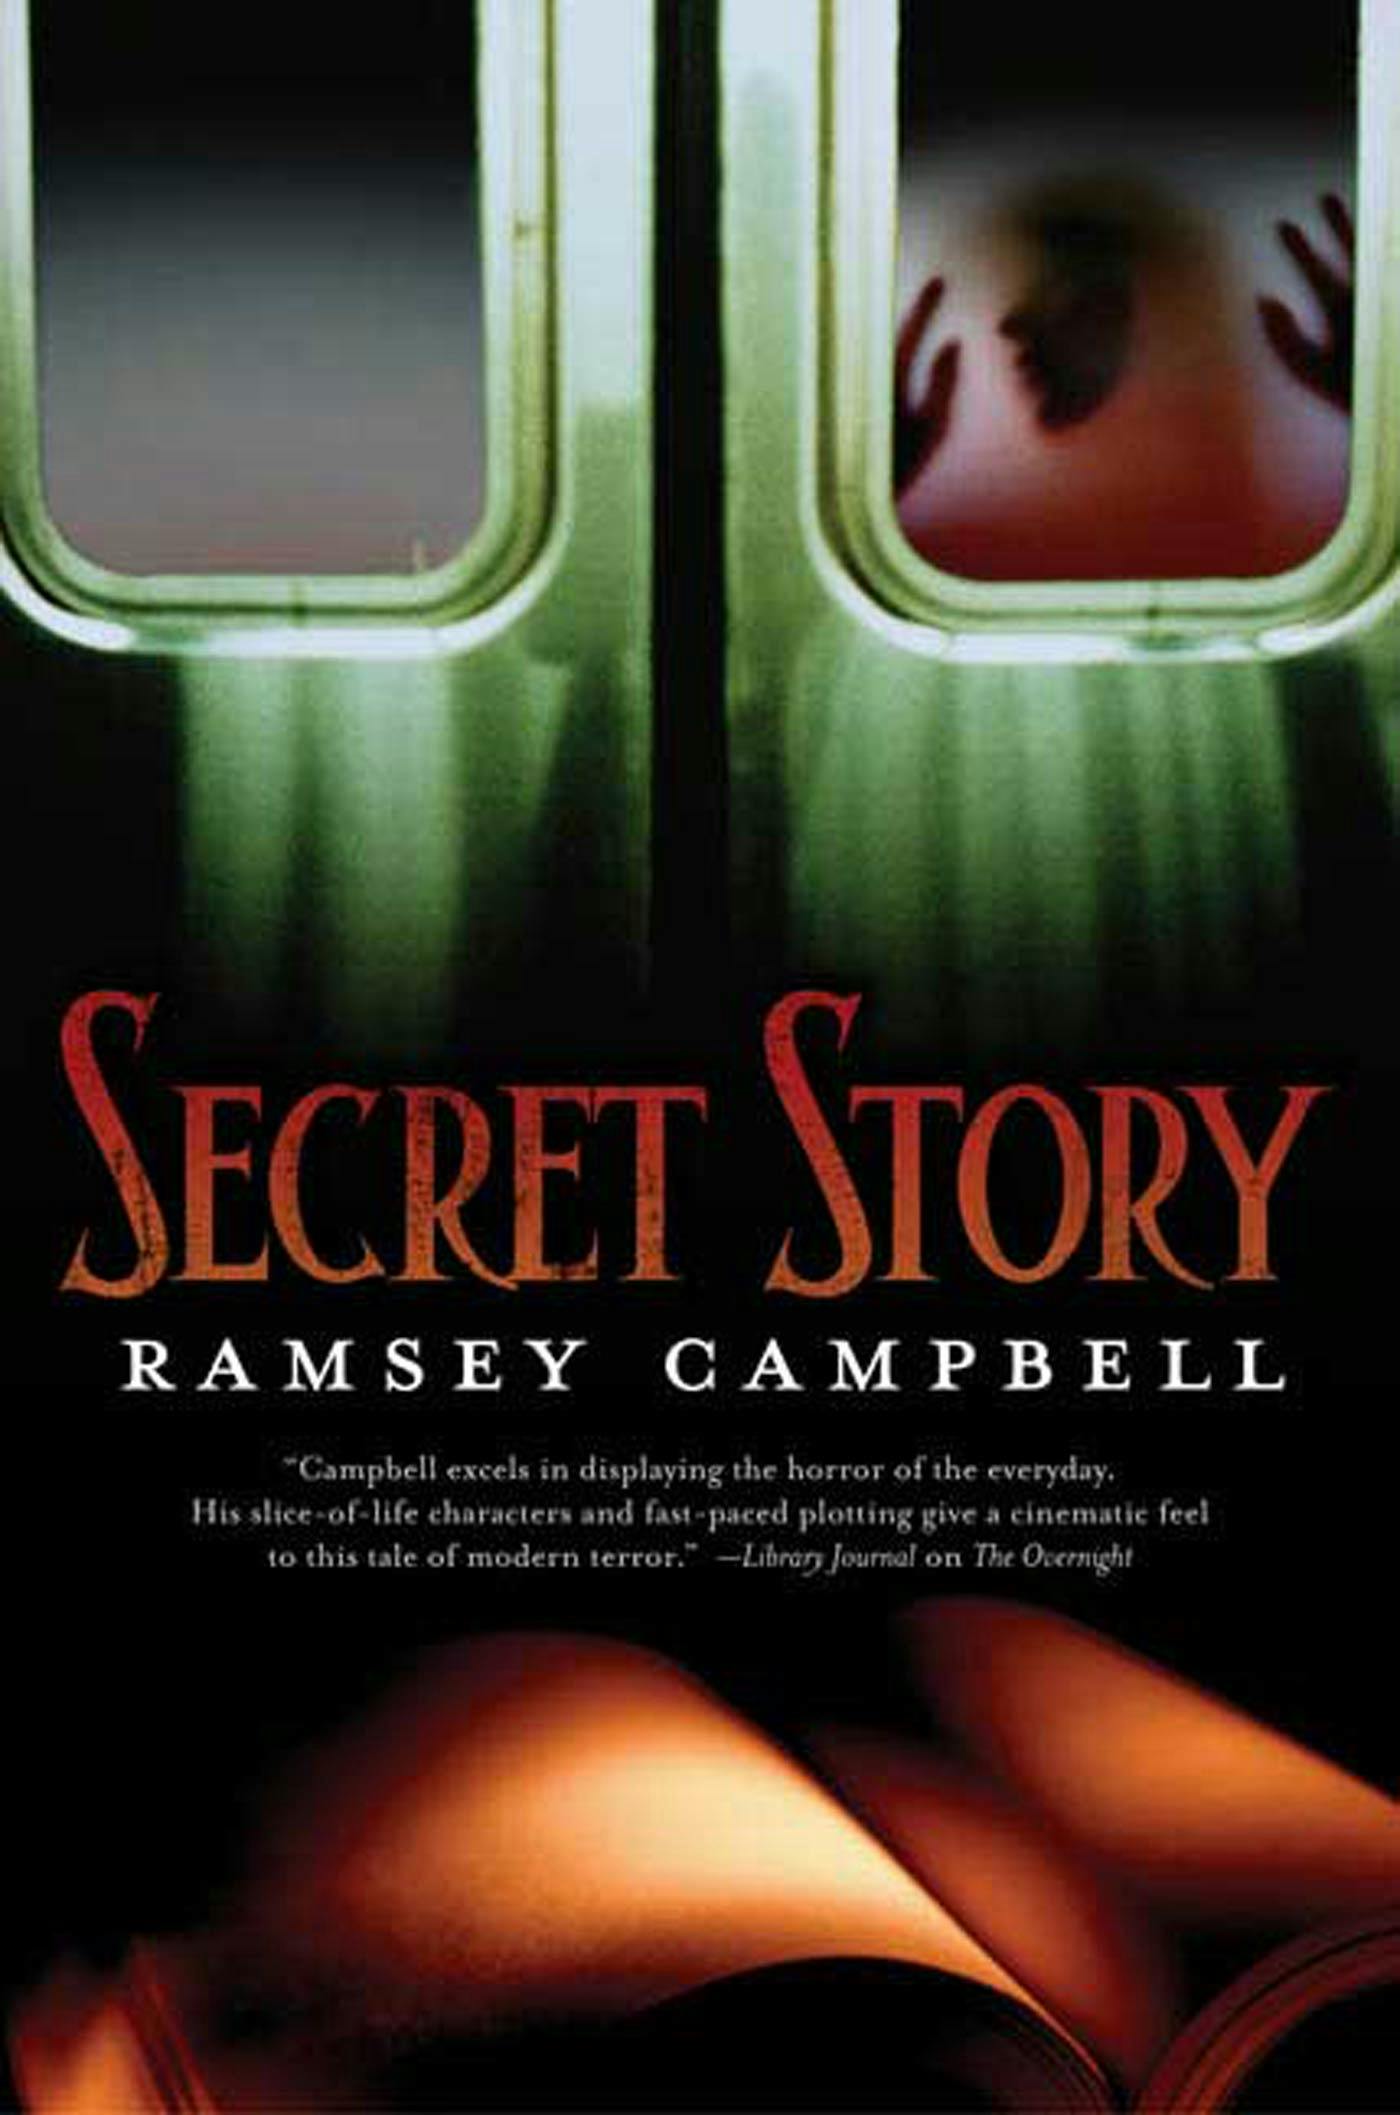 Cover for the book titled as: Secret Story